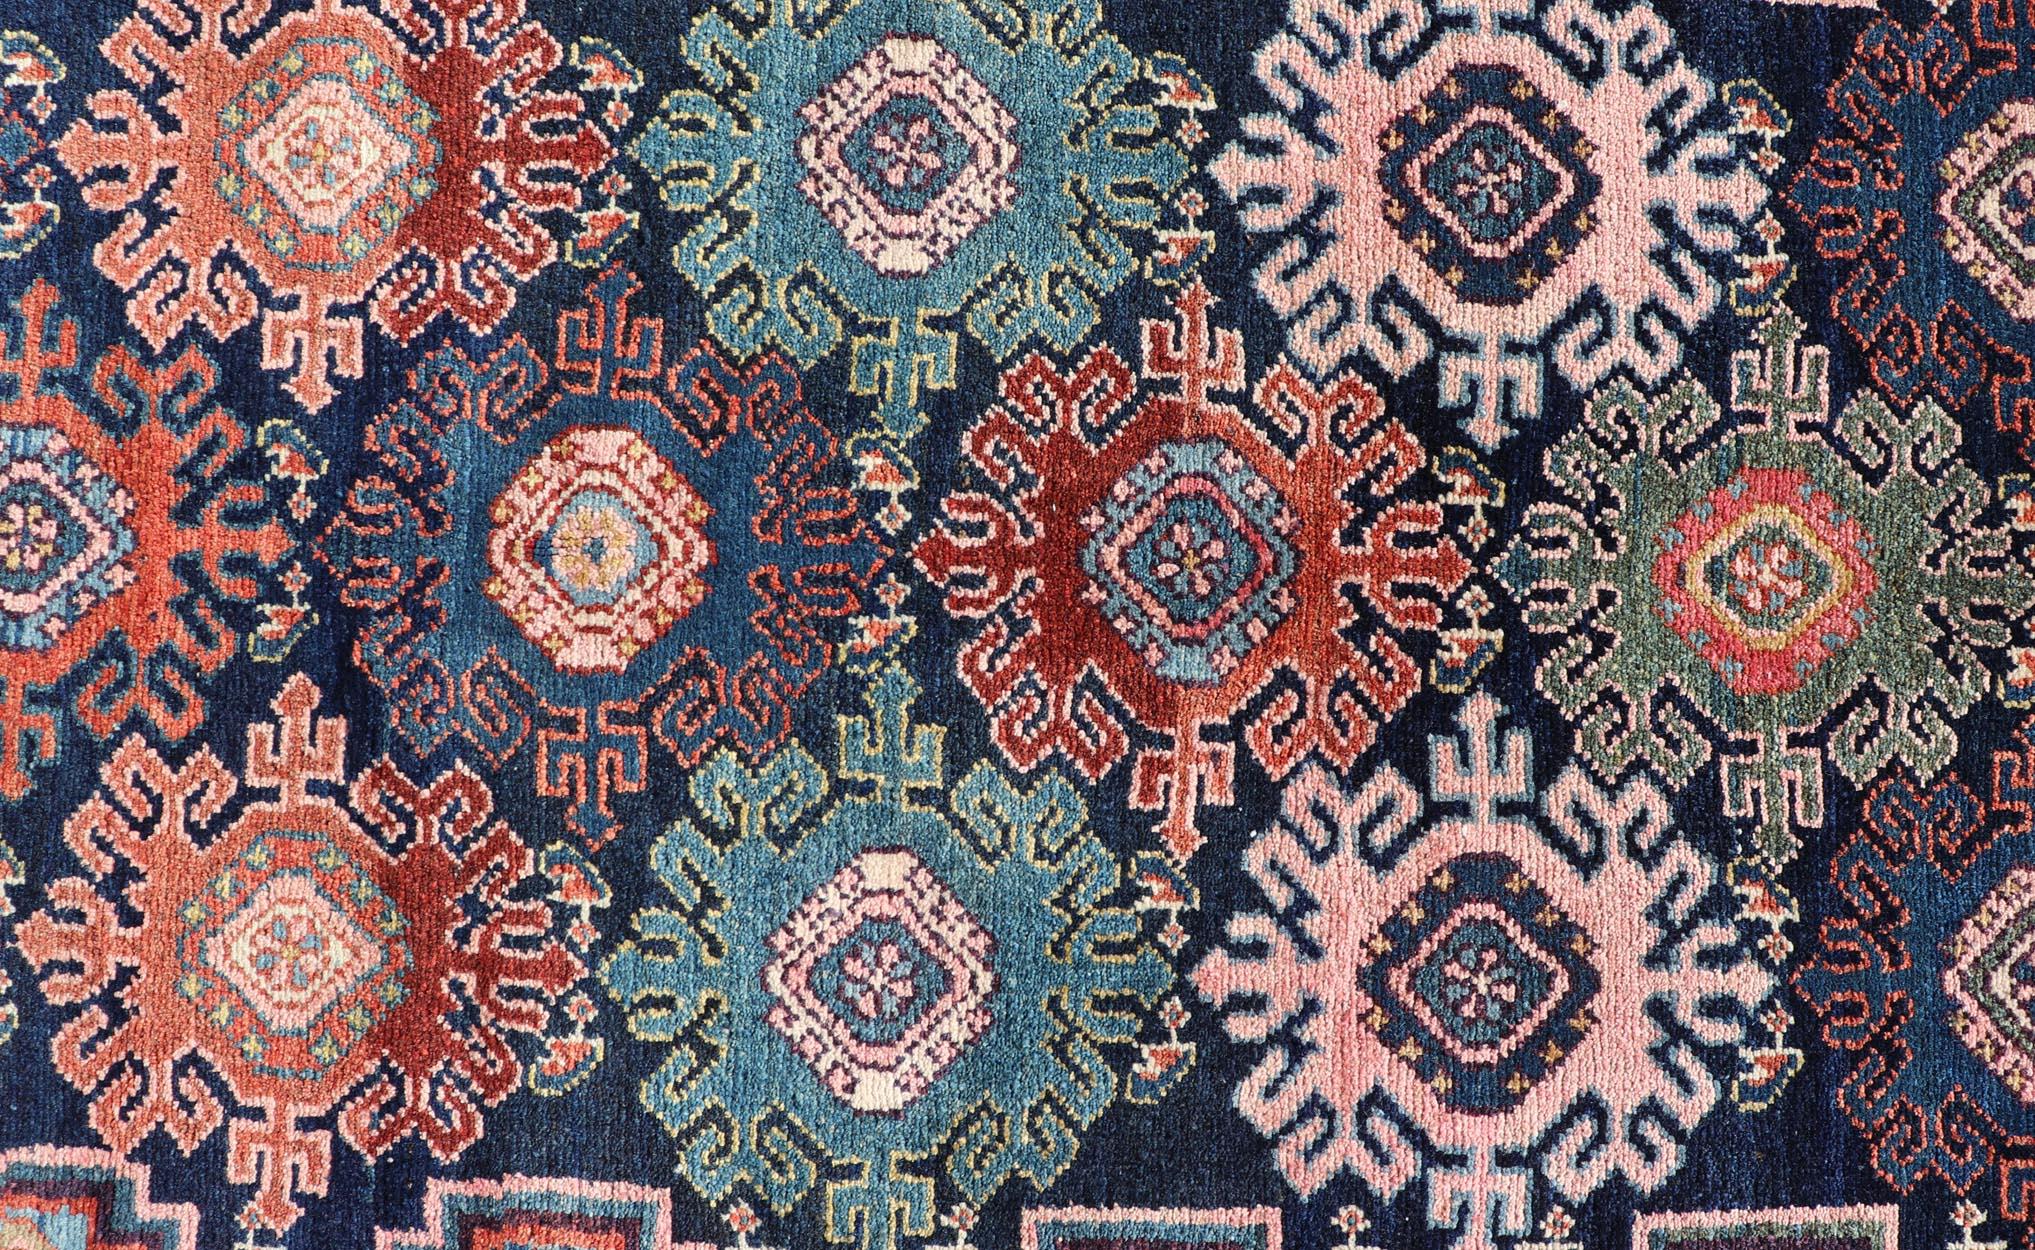 Antique Persian Hamadan Runner with All-Over Geometric Motifs In Jewel Tones In Good Condition For Sale In Atlanta, GA